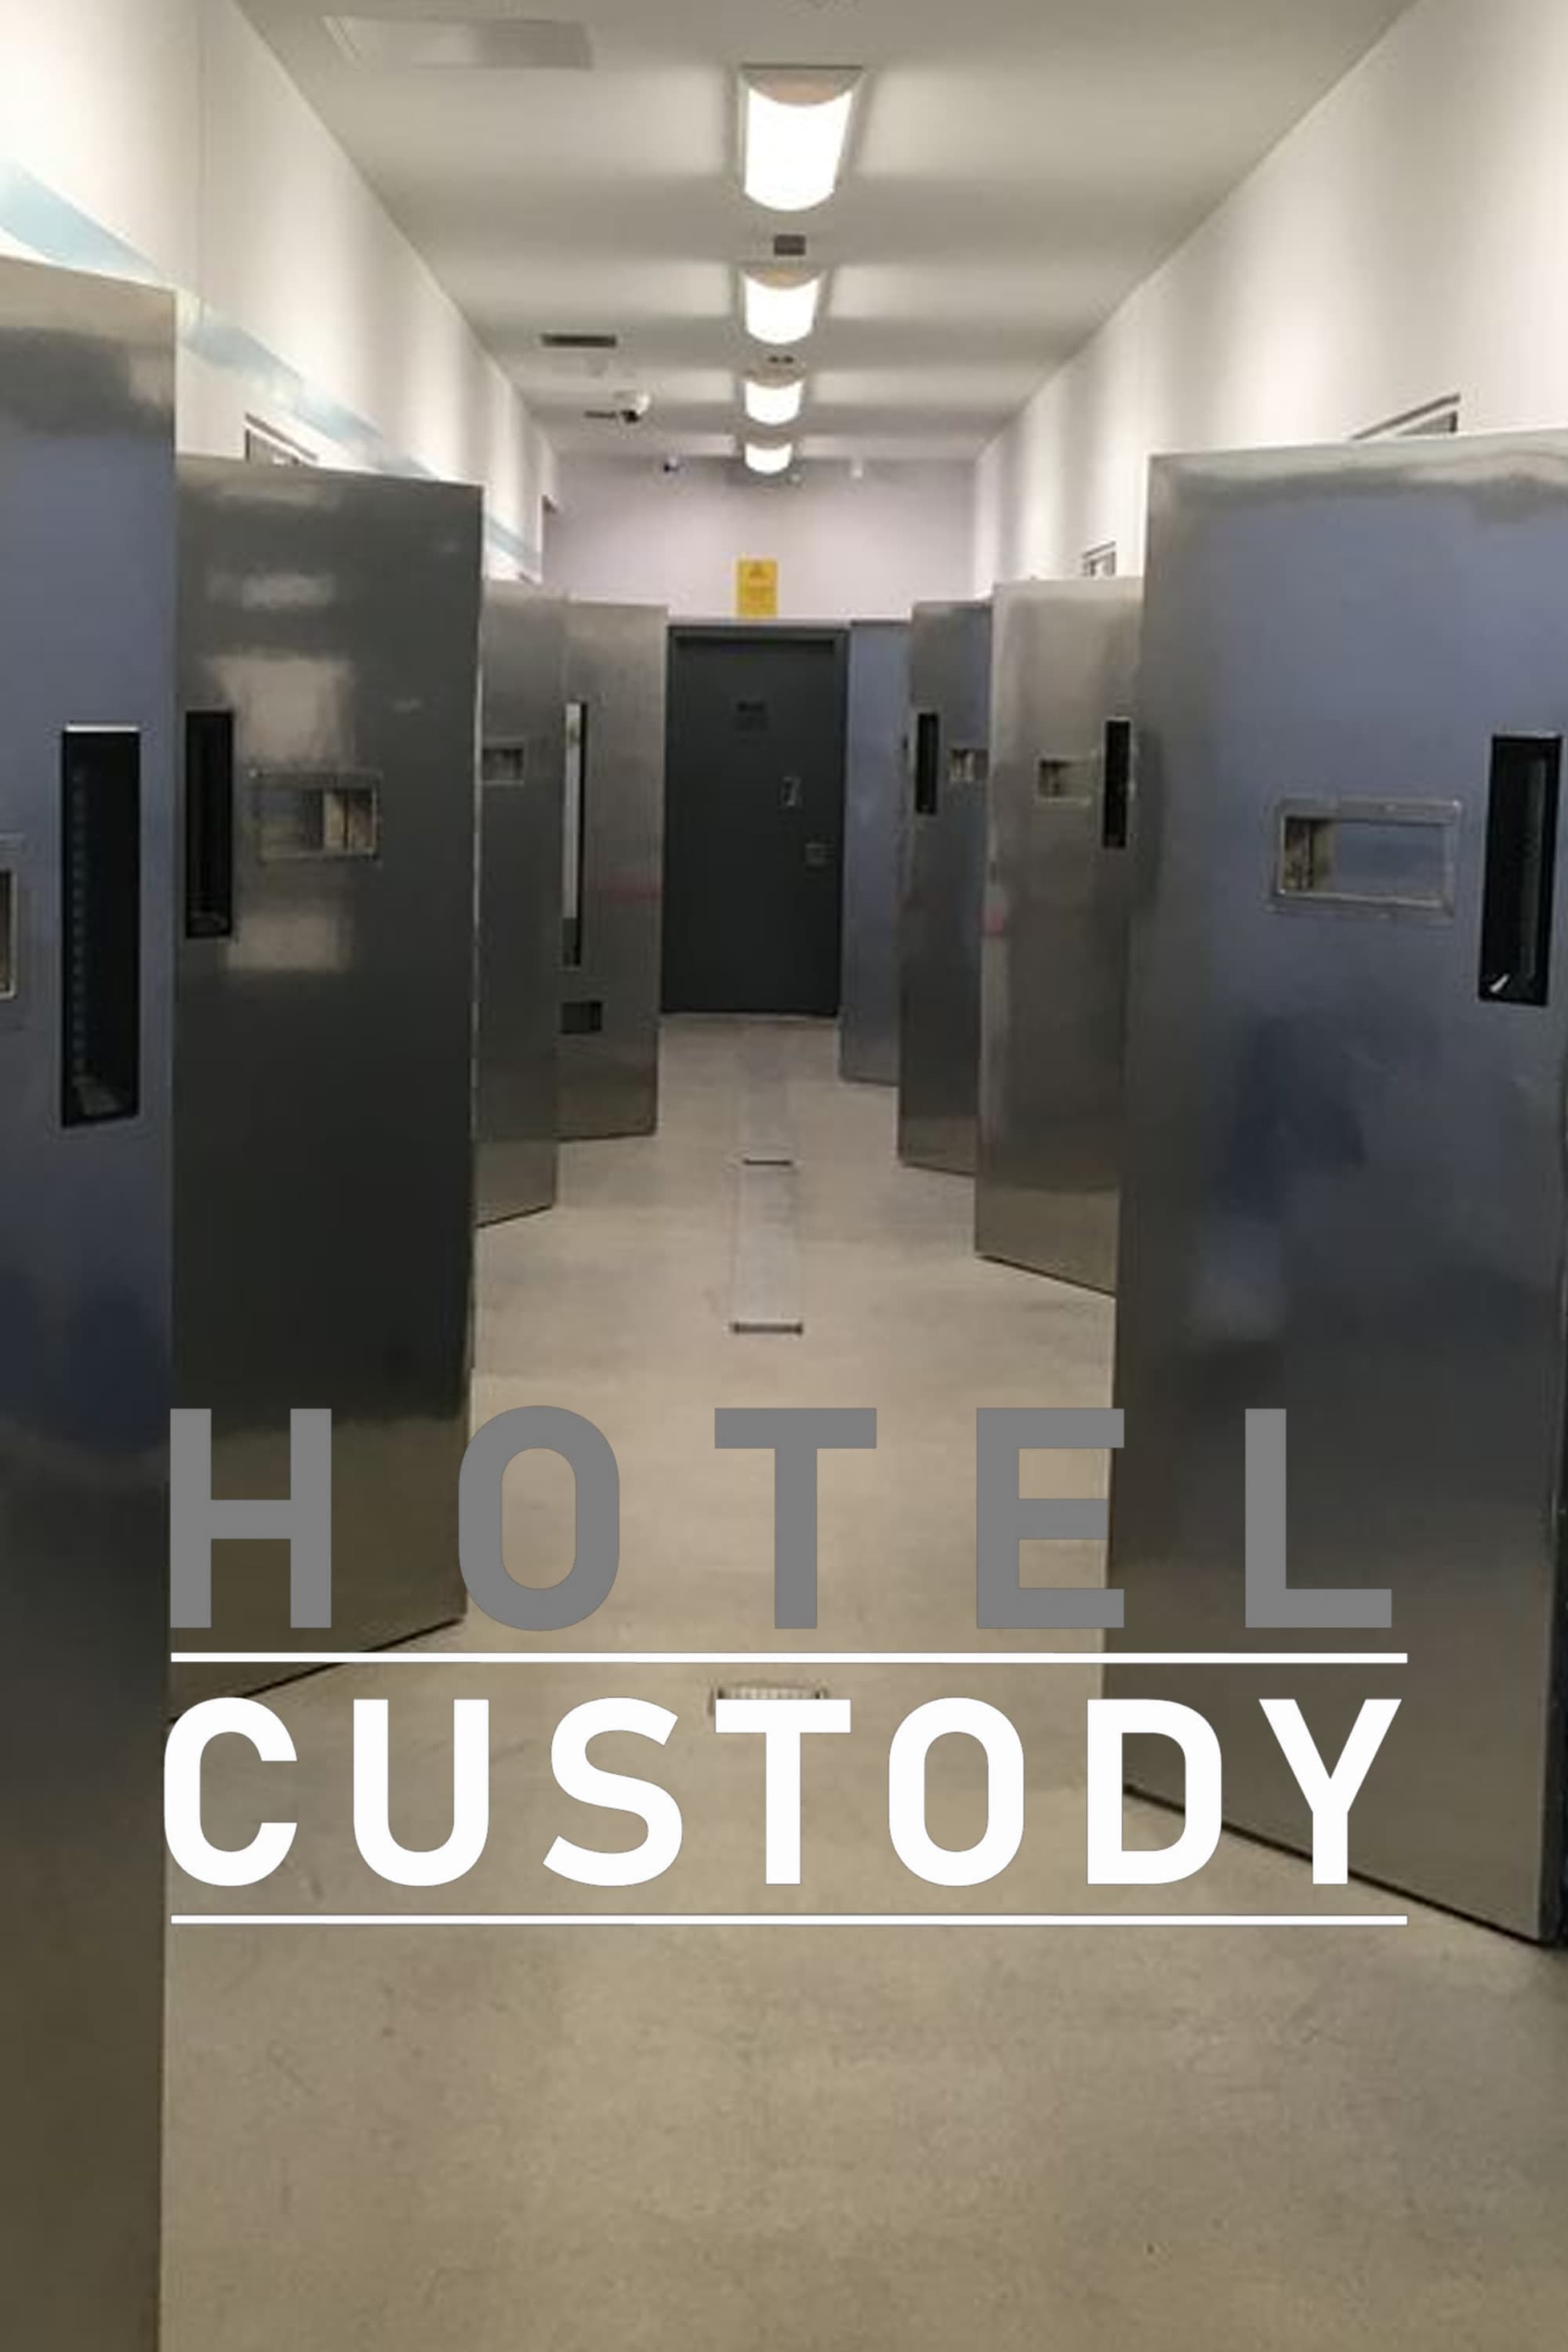 Hotel Custody TV Shows About Criminal